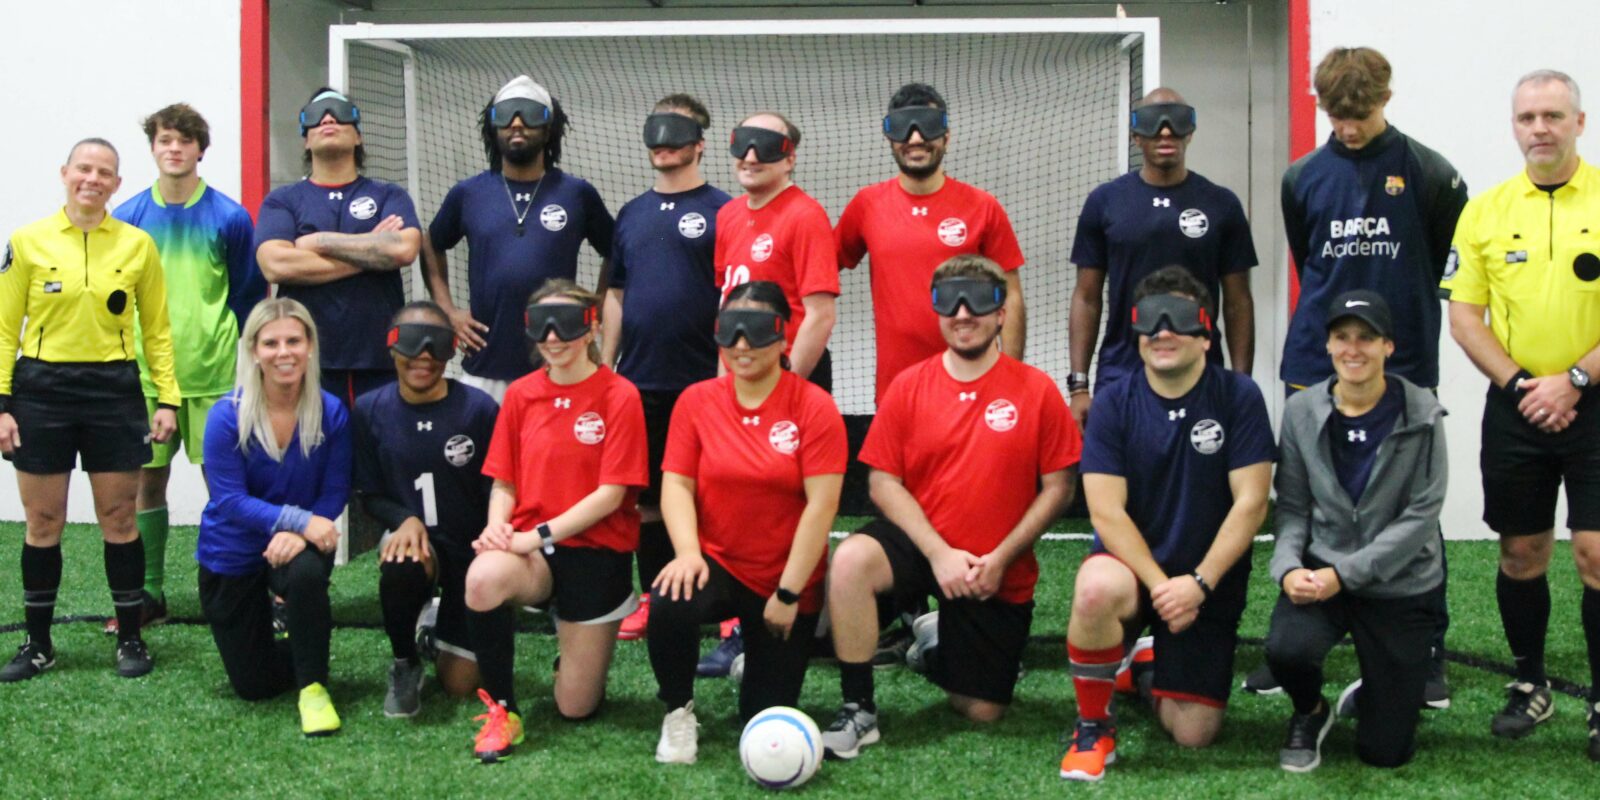 Katie Smith with the Ohio blind soccer team